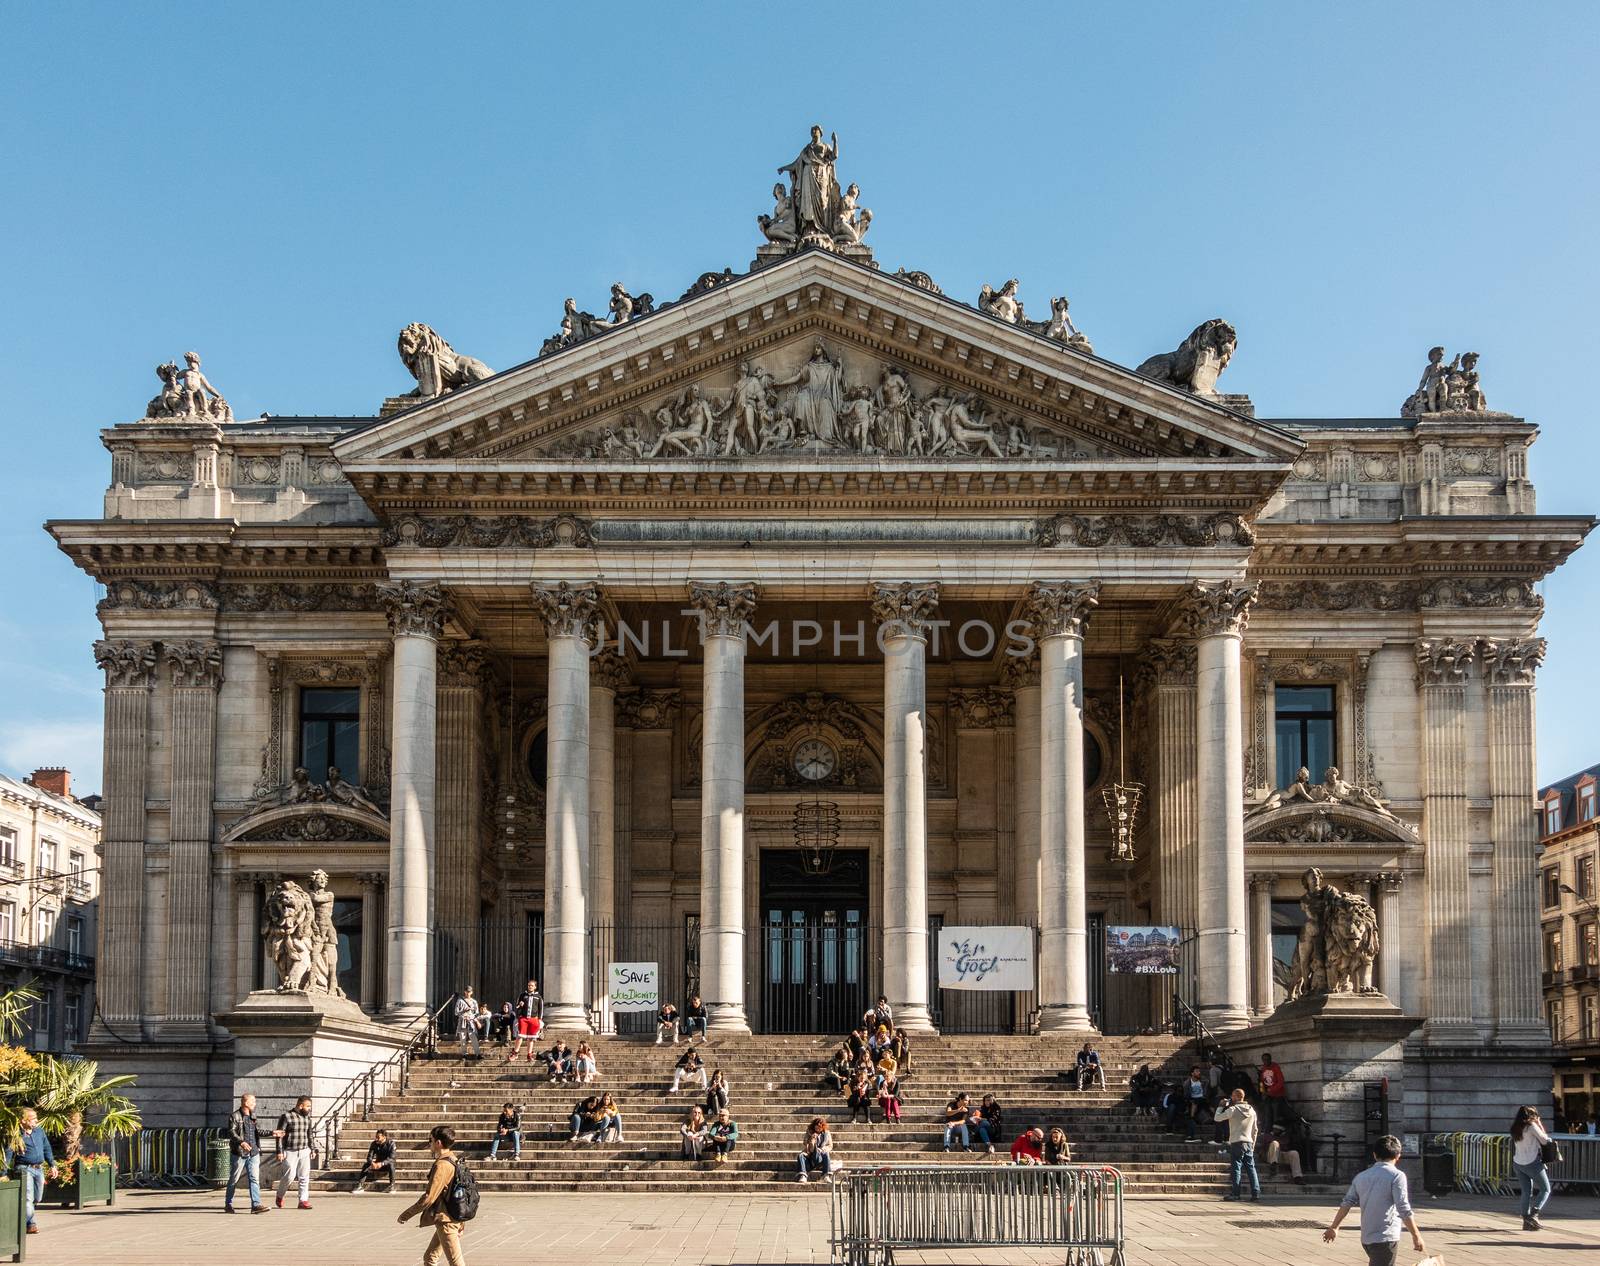 Brussels, Belgium - September 26, 2018: Brown stone Stock Exchange building as Greek temple with pillars, statues and frescoes. People on stair. Blue sky.